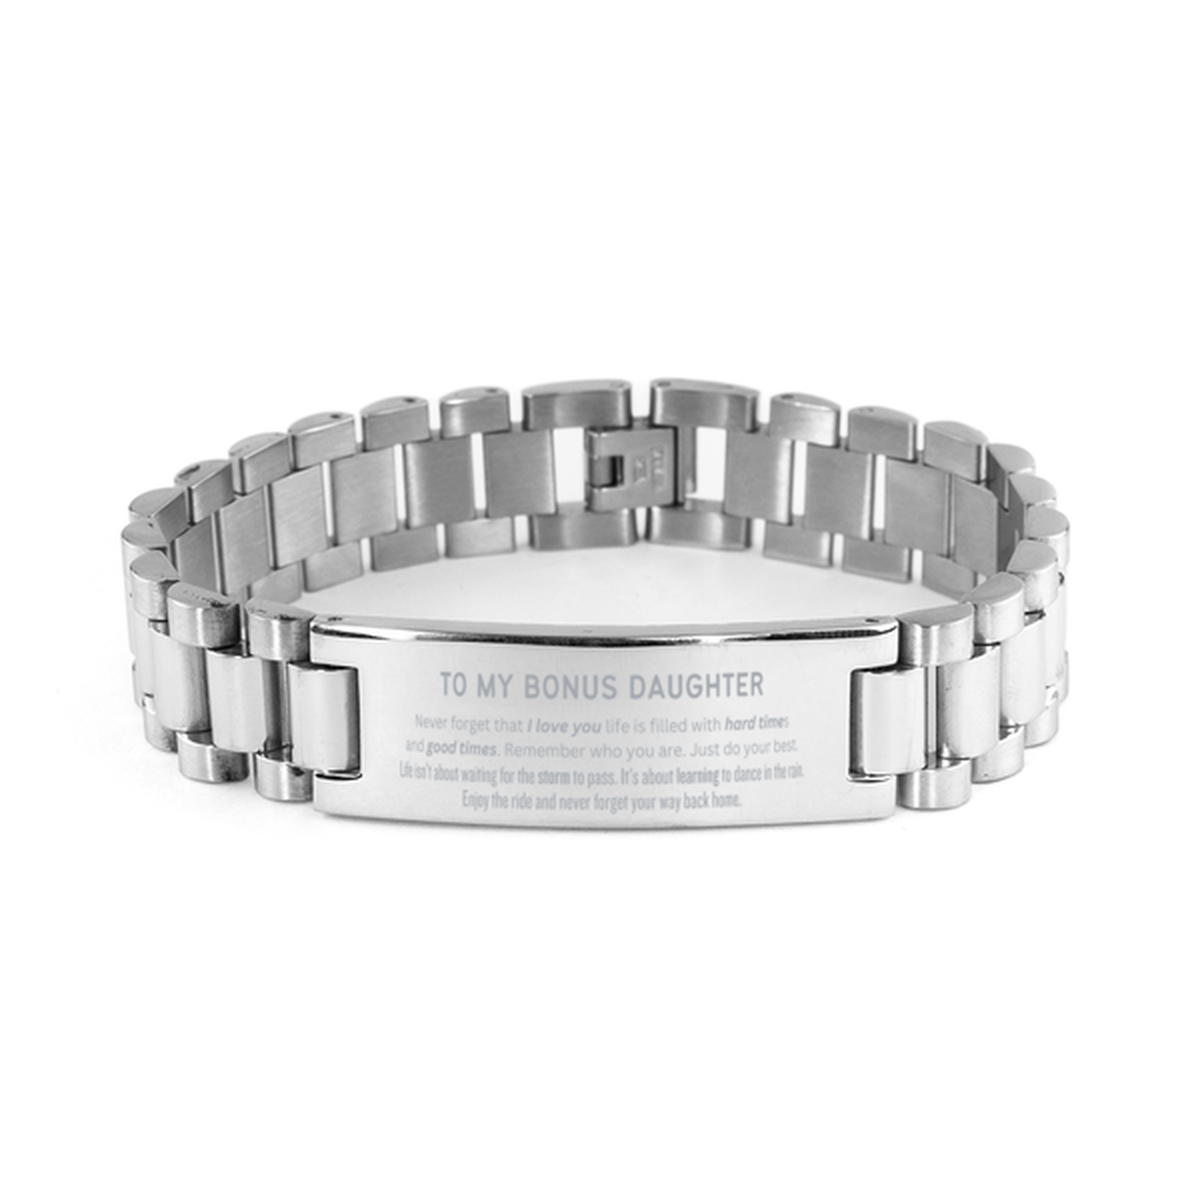 Christmas Bonus Daughter Ladder Stainless Steel Bracelet Gifts, To My Bonus Daughter Birthday Thank You Gifts For Bonus Daughter, Graduation Unique Gifts For Bonus Daughter To My Bonus Daughter Never forget that I love you life is filled with hard times a